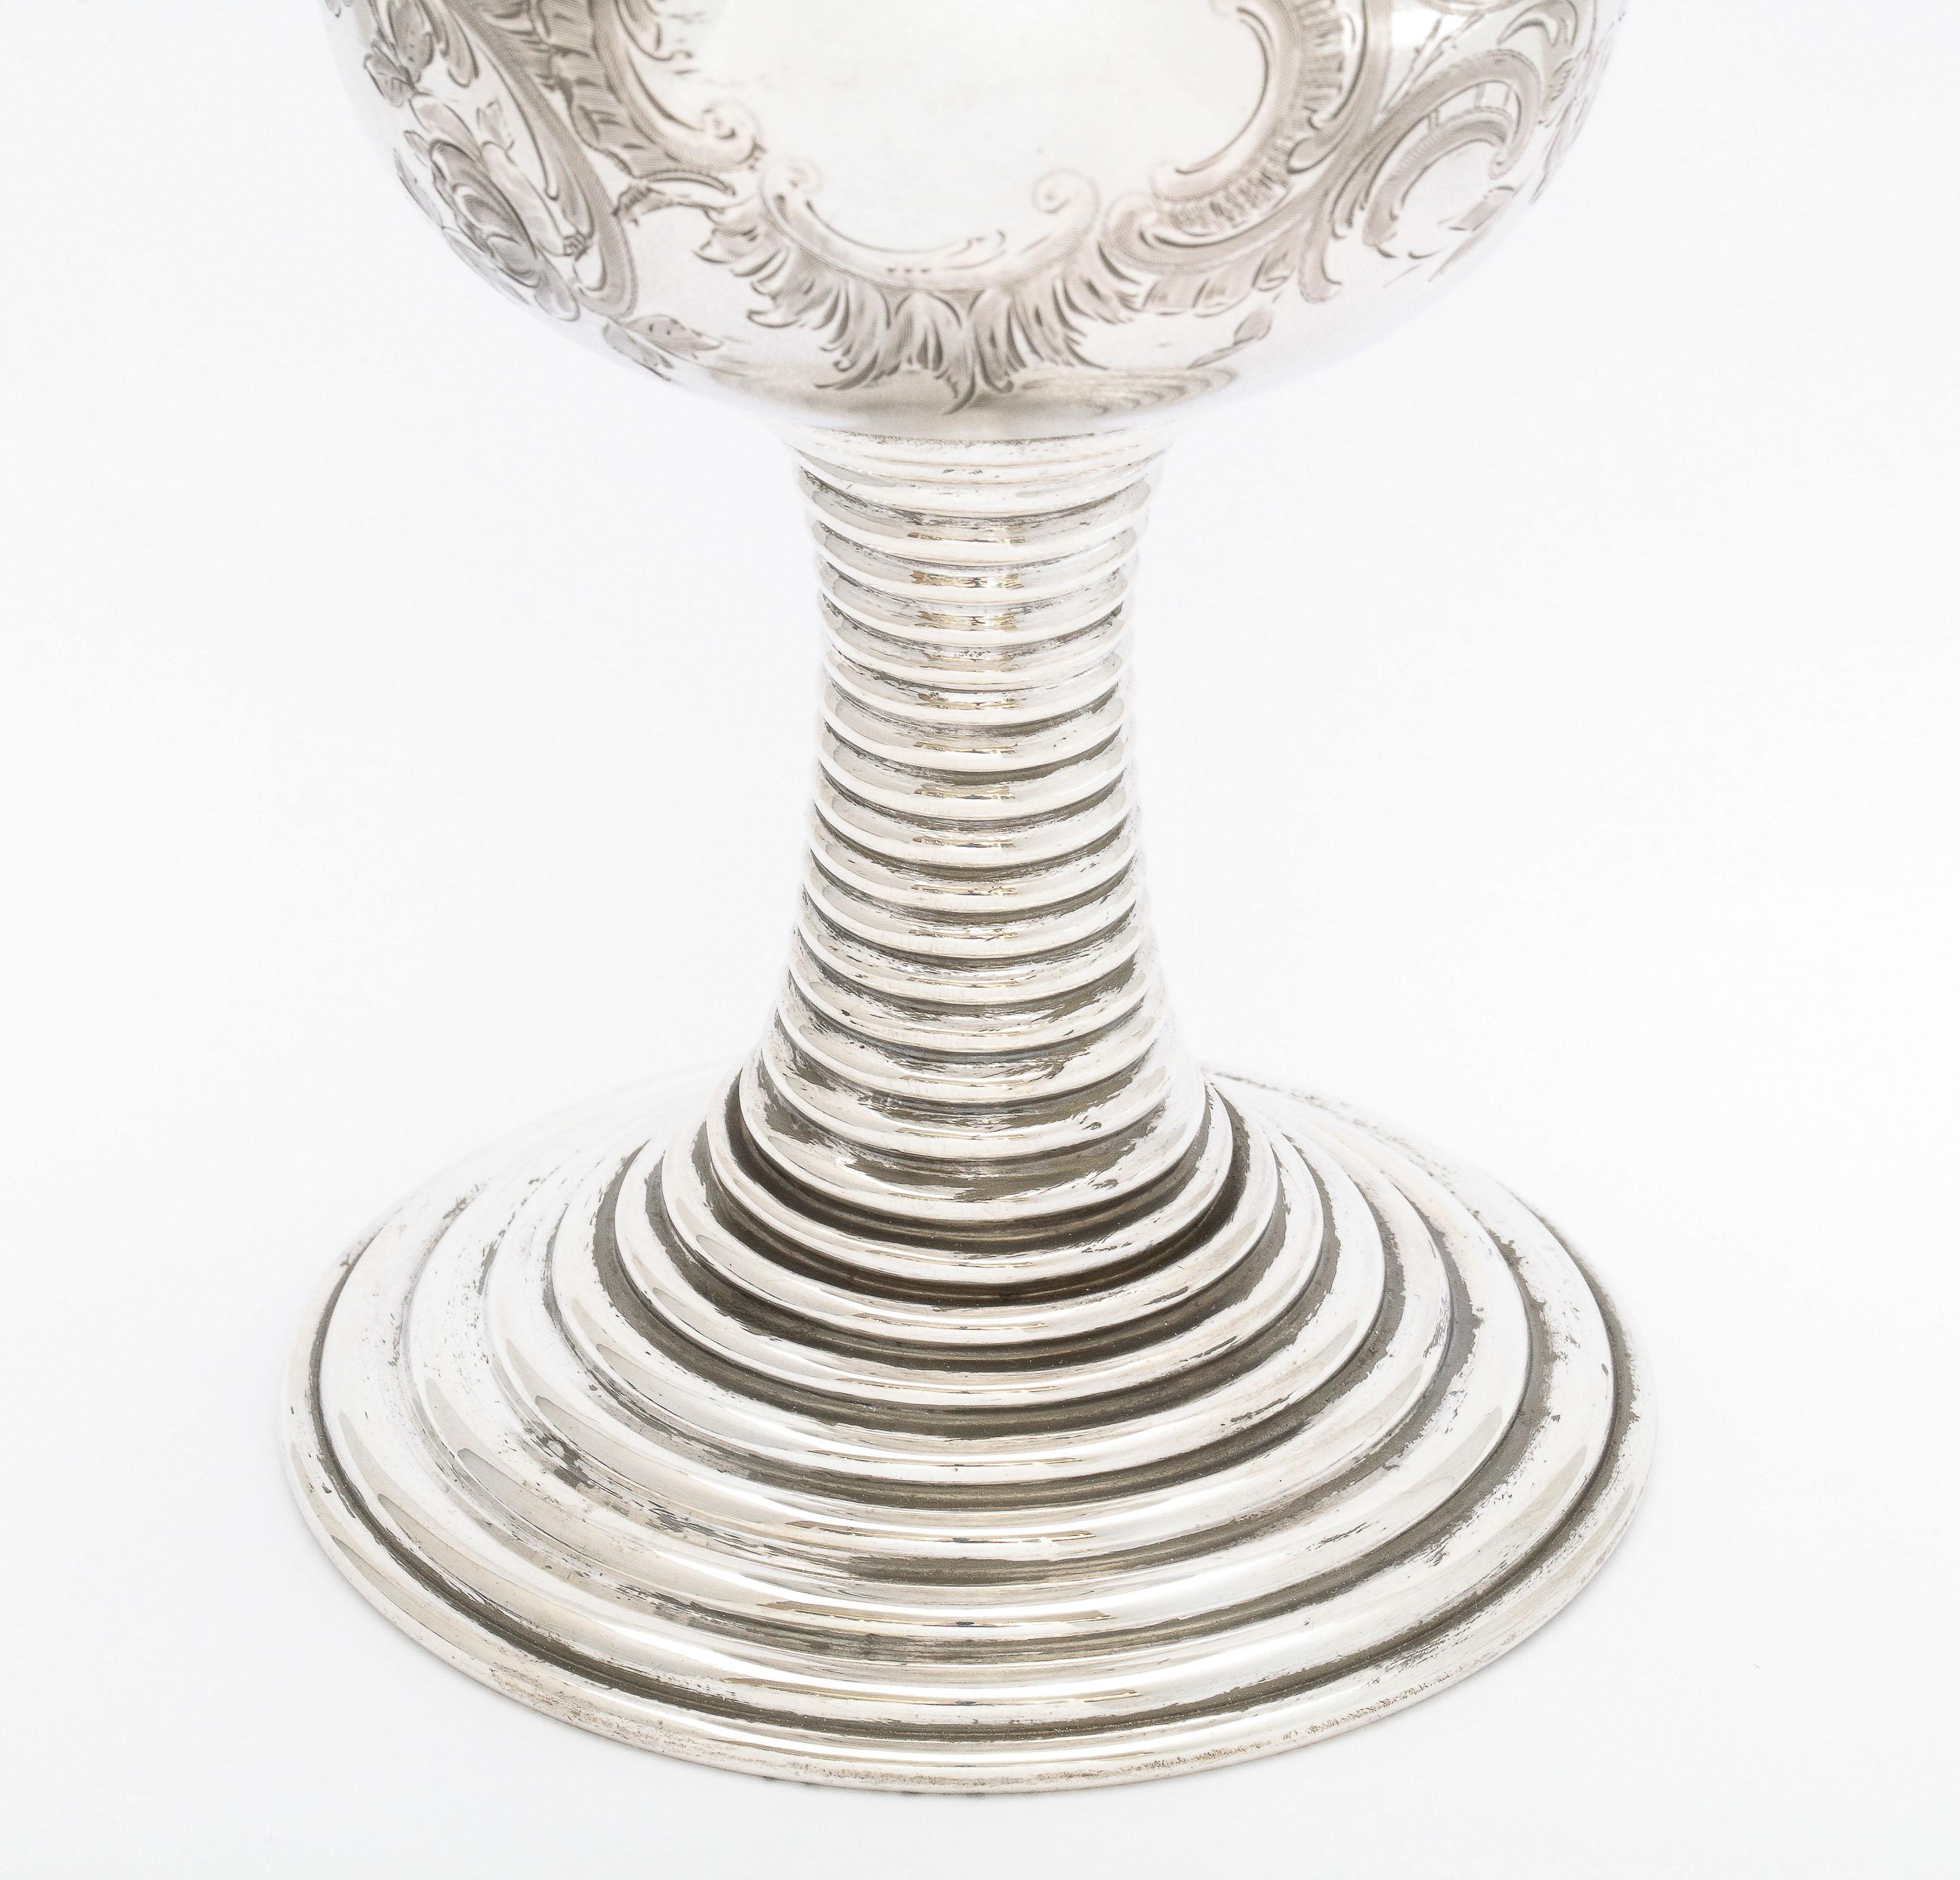 Early 20th Century Medieval/15th Century-Style Continental Silver '.800' Roemer/ Rummer Goblet For Sale